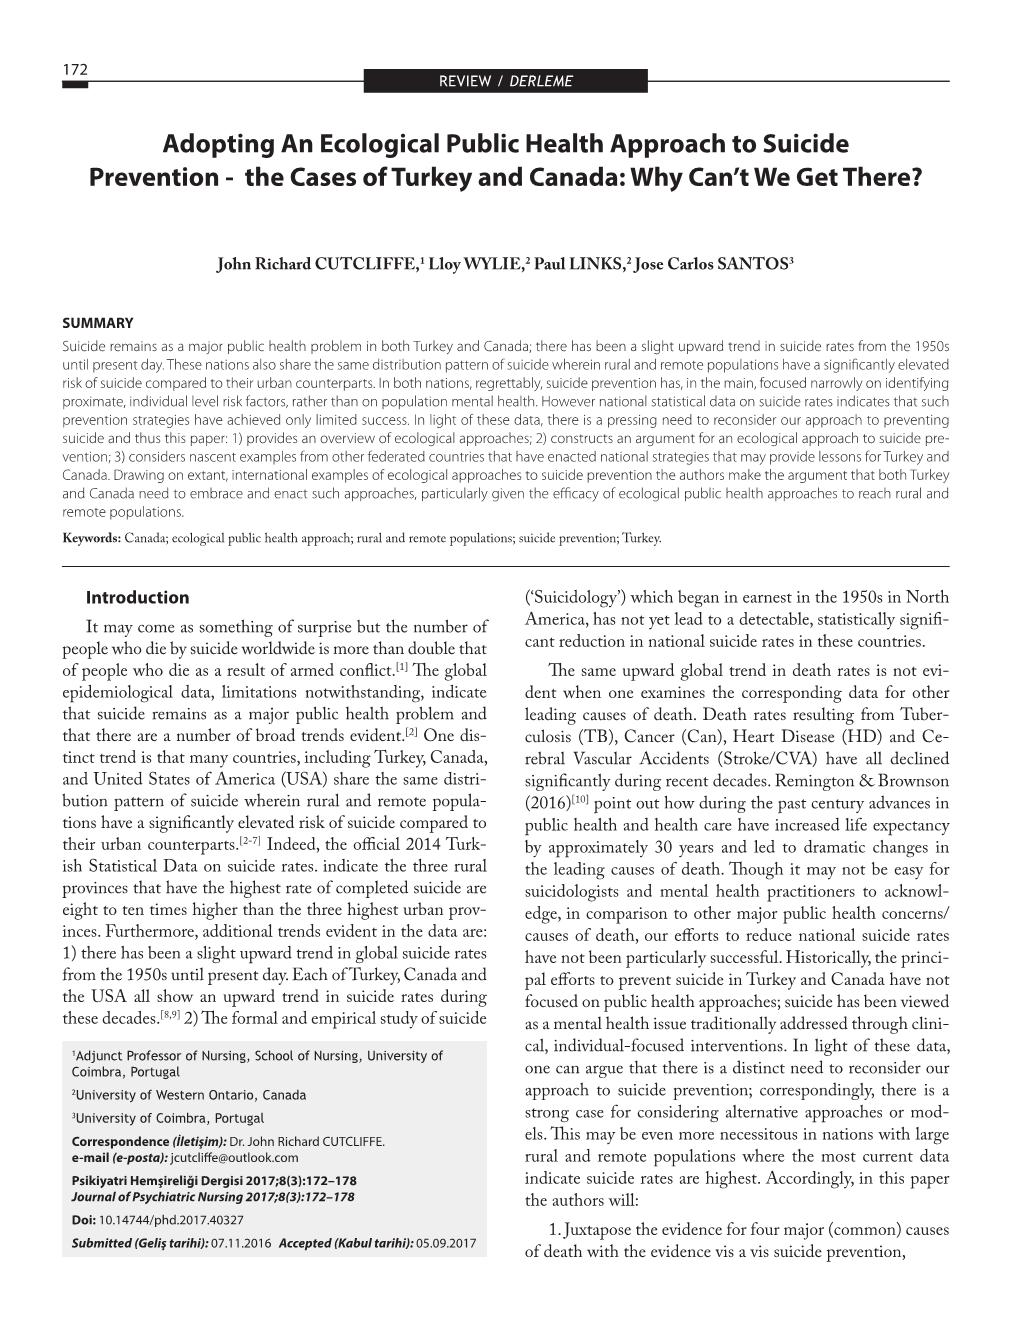 Adopting an Ecological Public Health Approach to Suicide Prevention - the Cases of Turkey and Canada: Why Can’T We Get There?